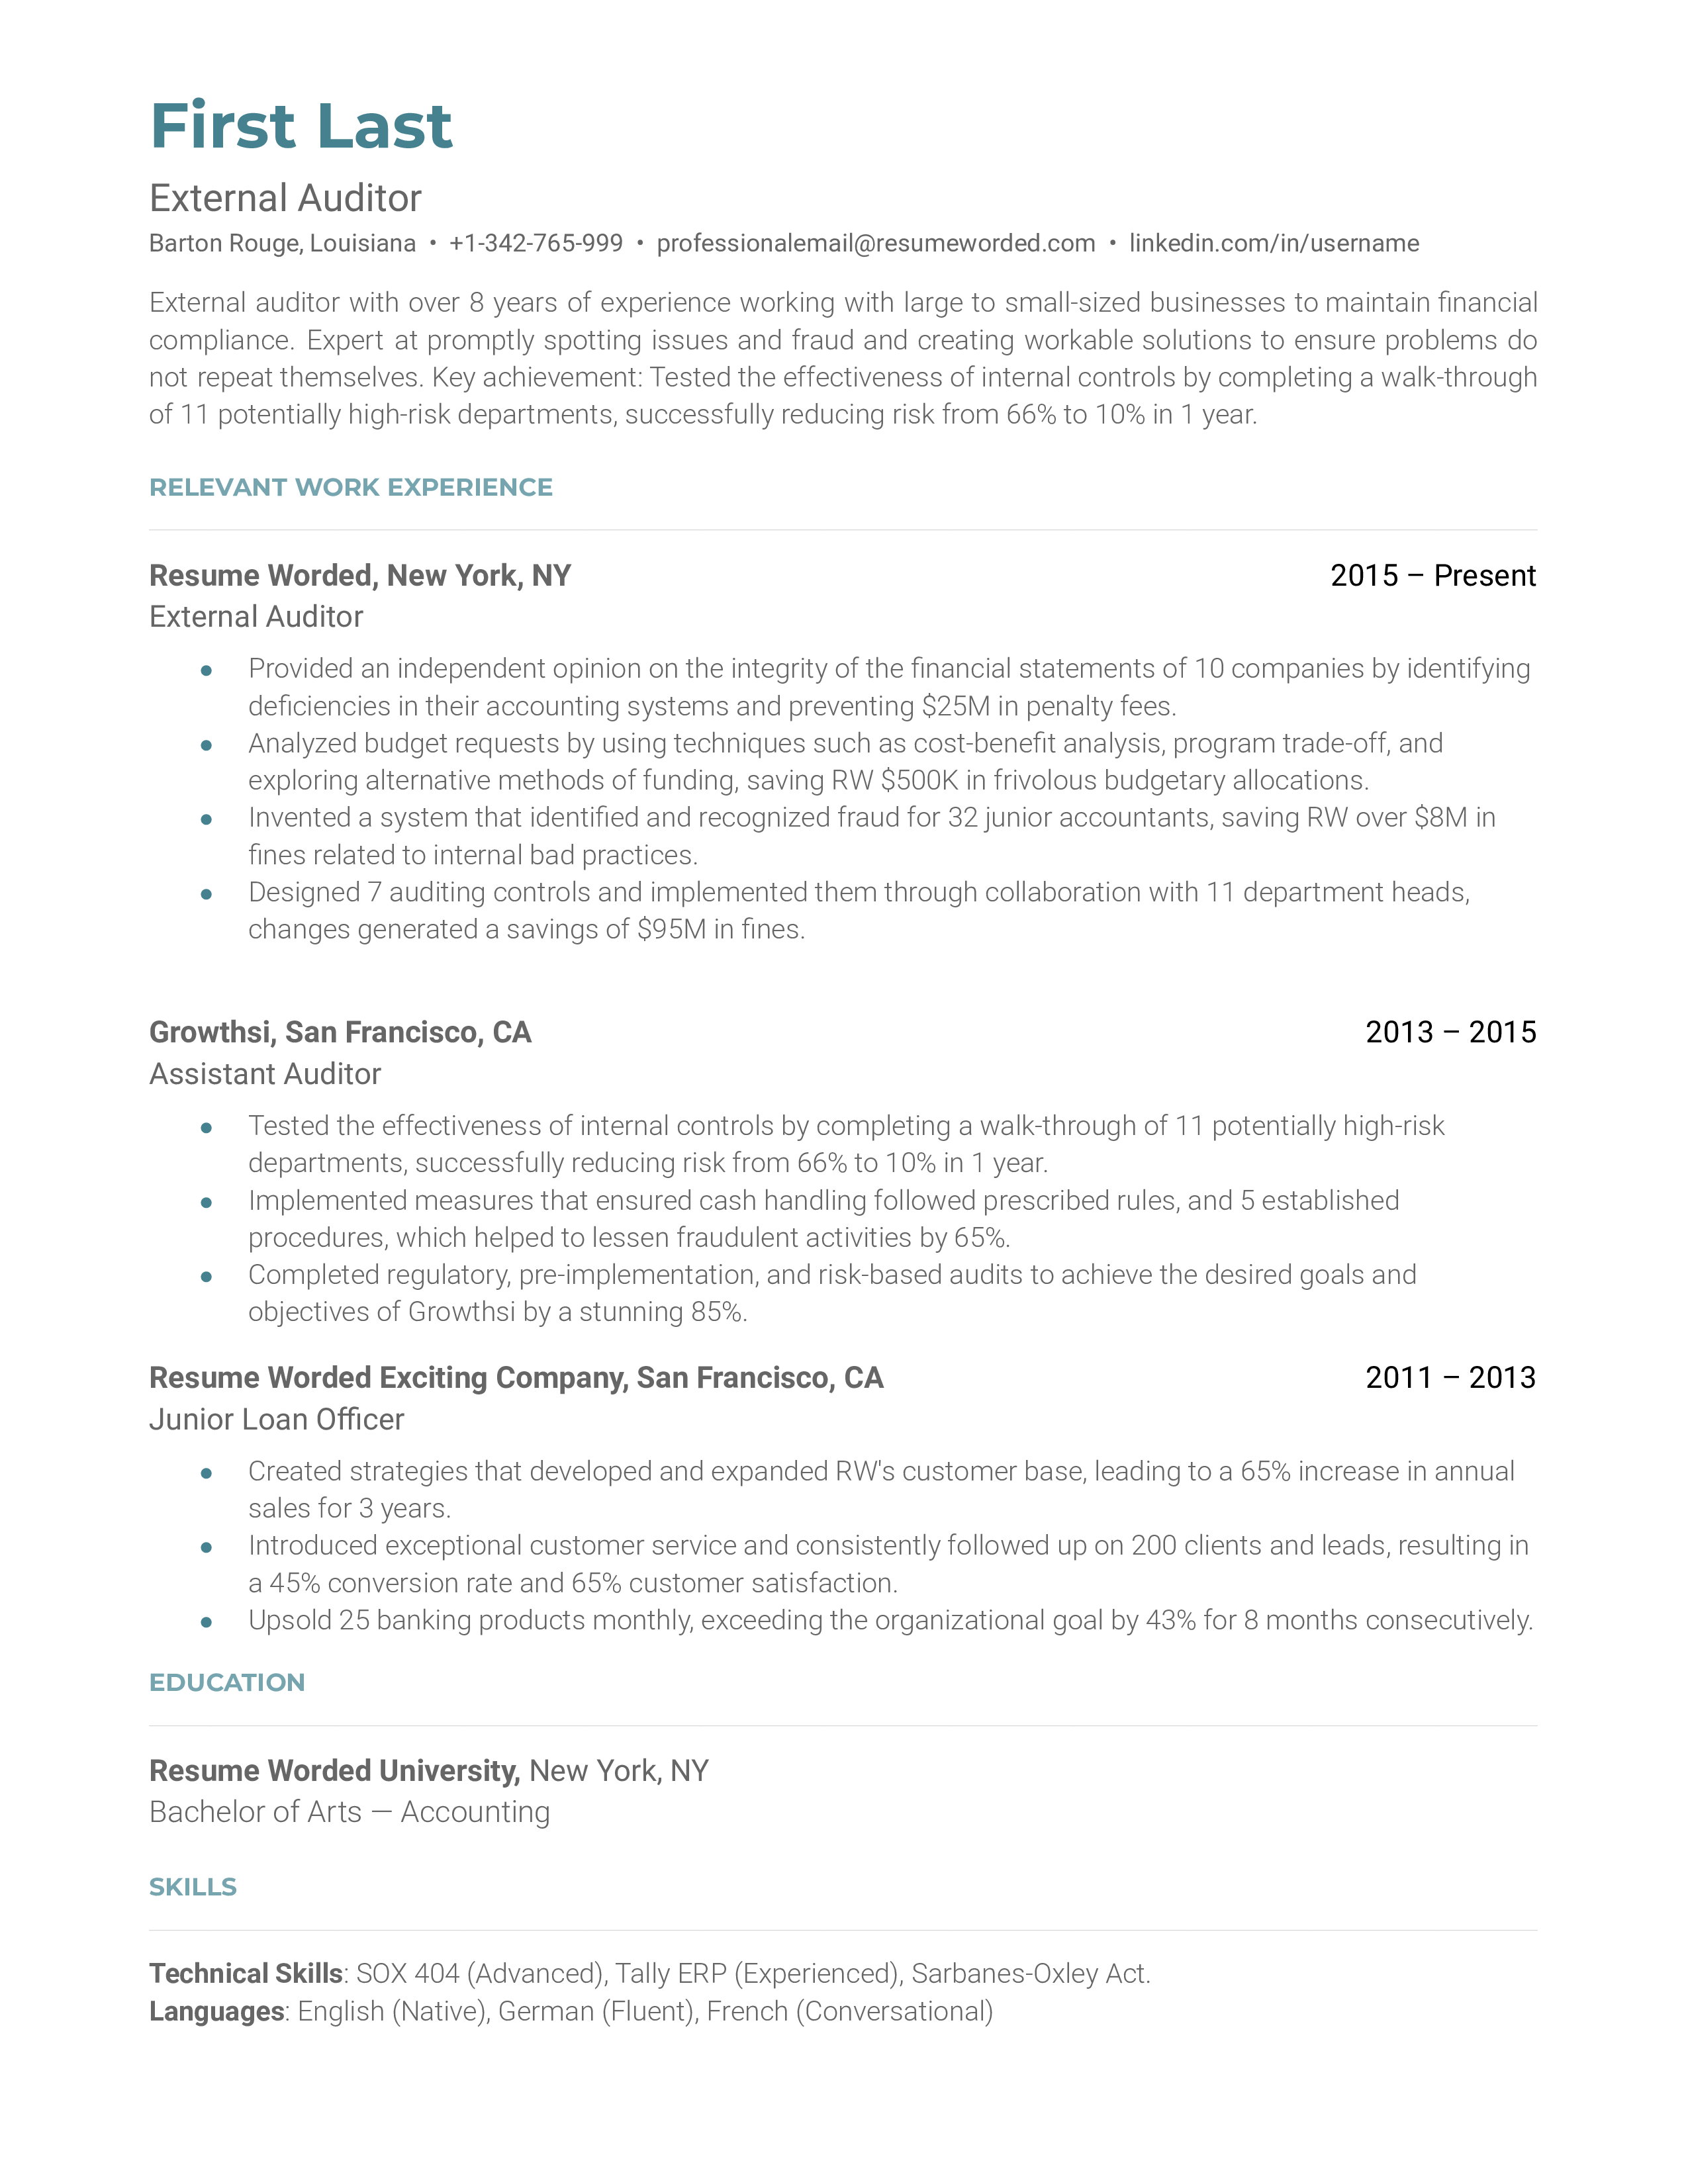 External auditor resume sample that highlights applicant's specialization and previous clients.